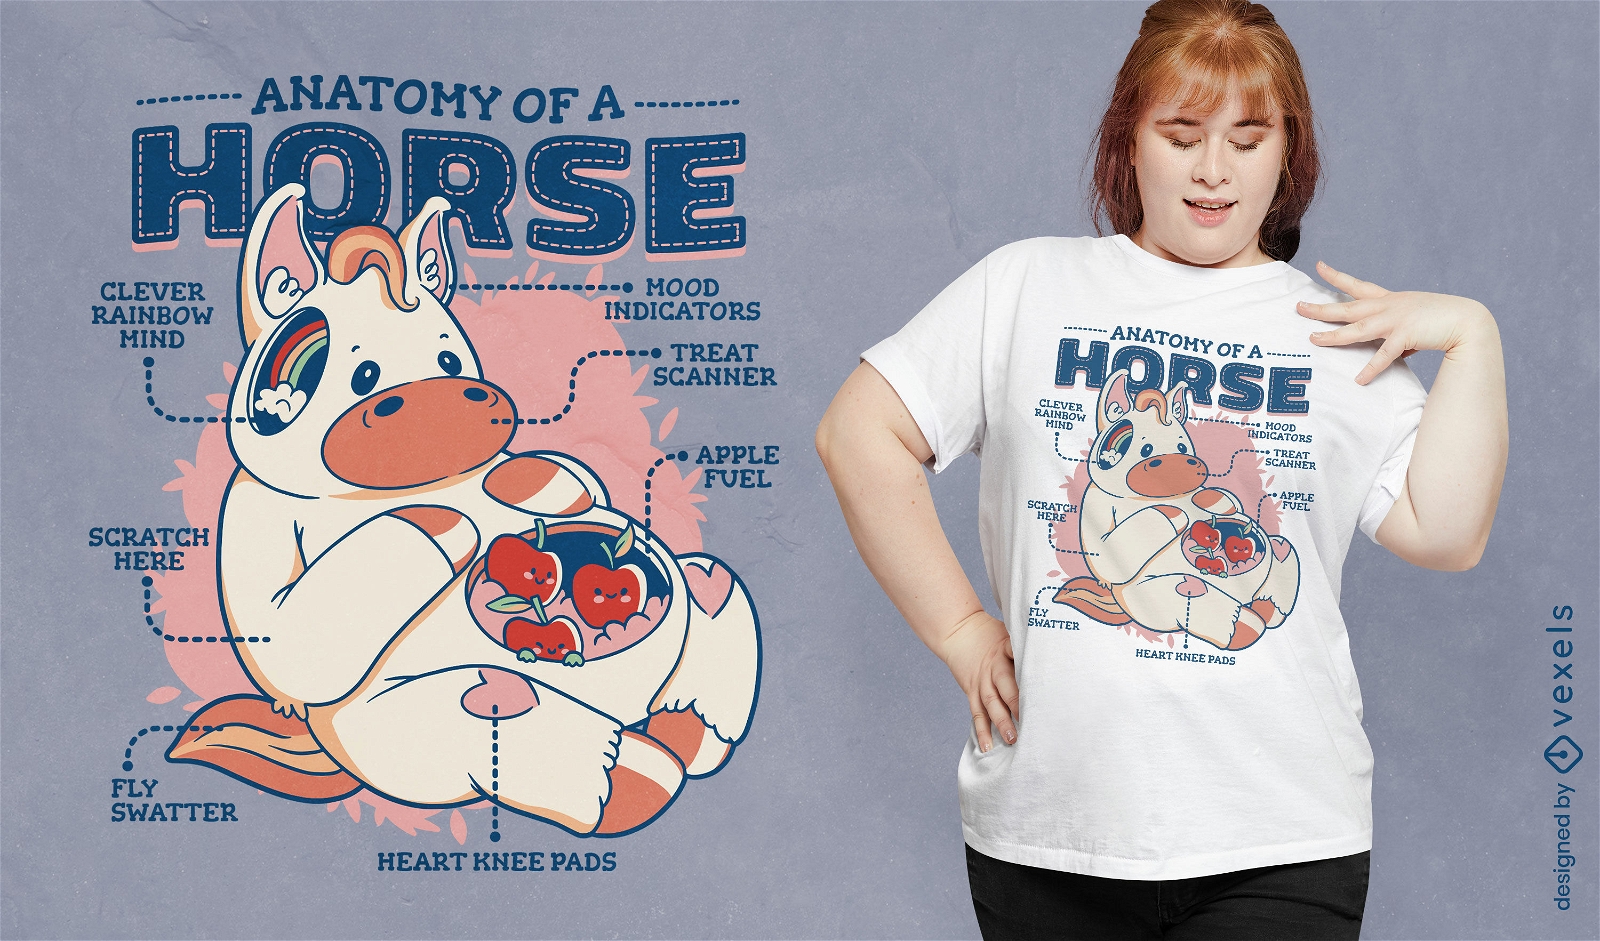 Funny anatomy of a horse t-shirt design